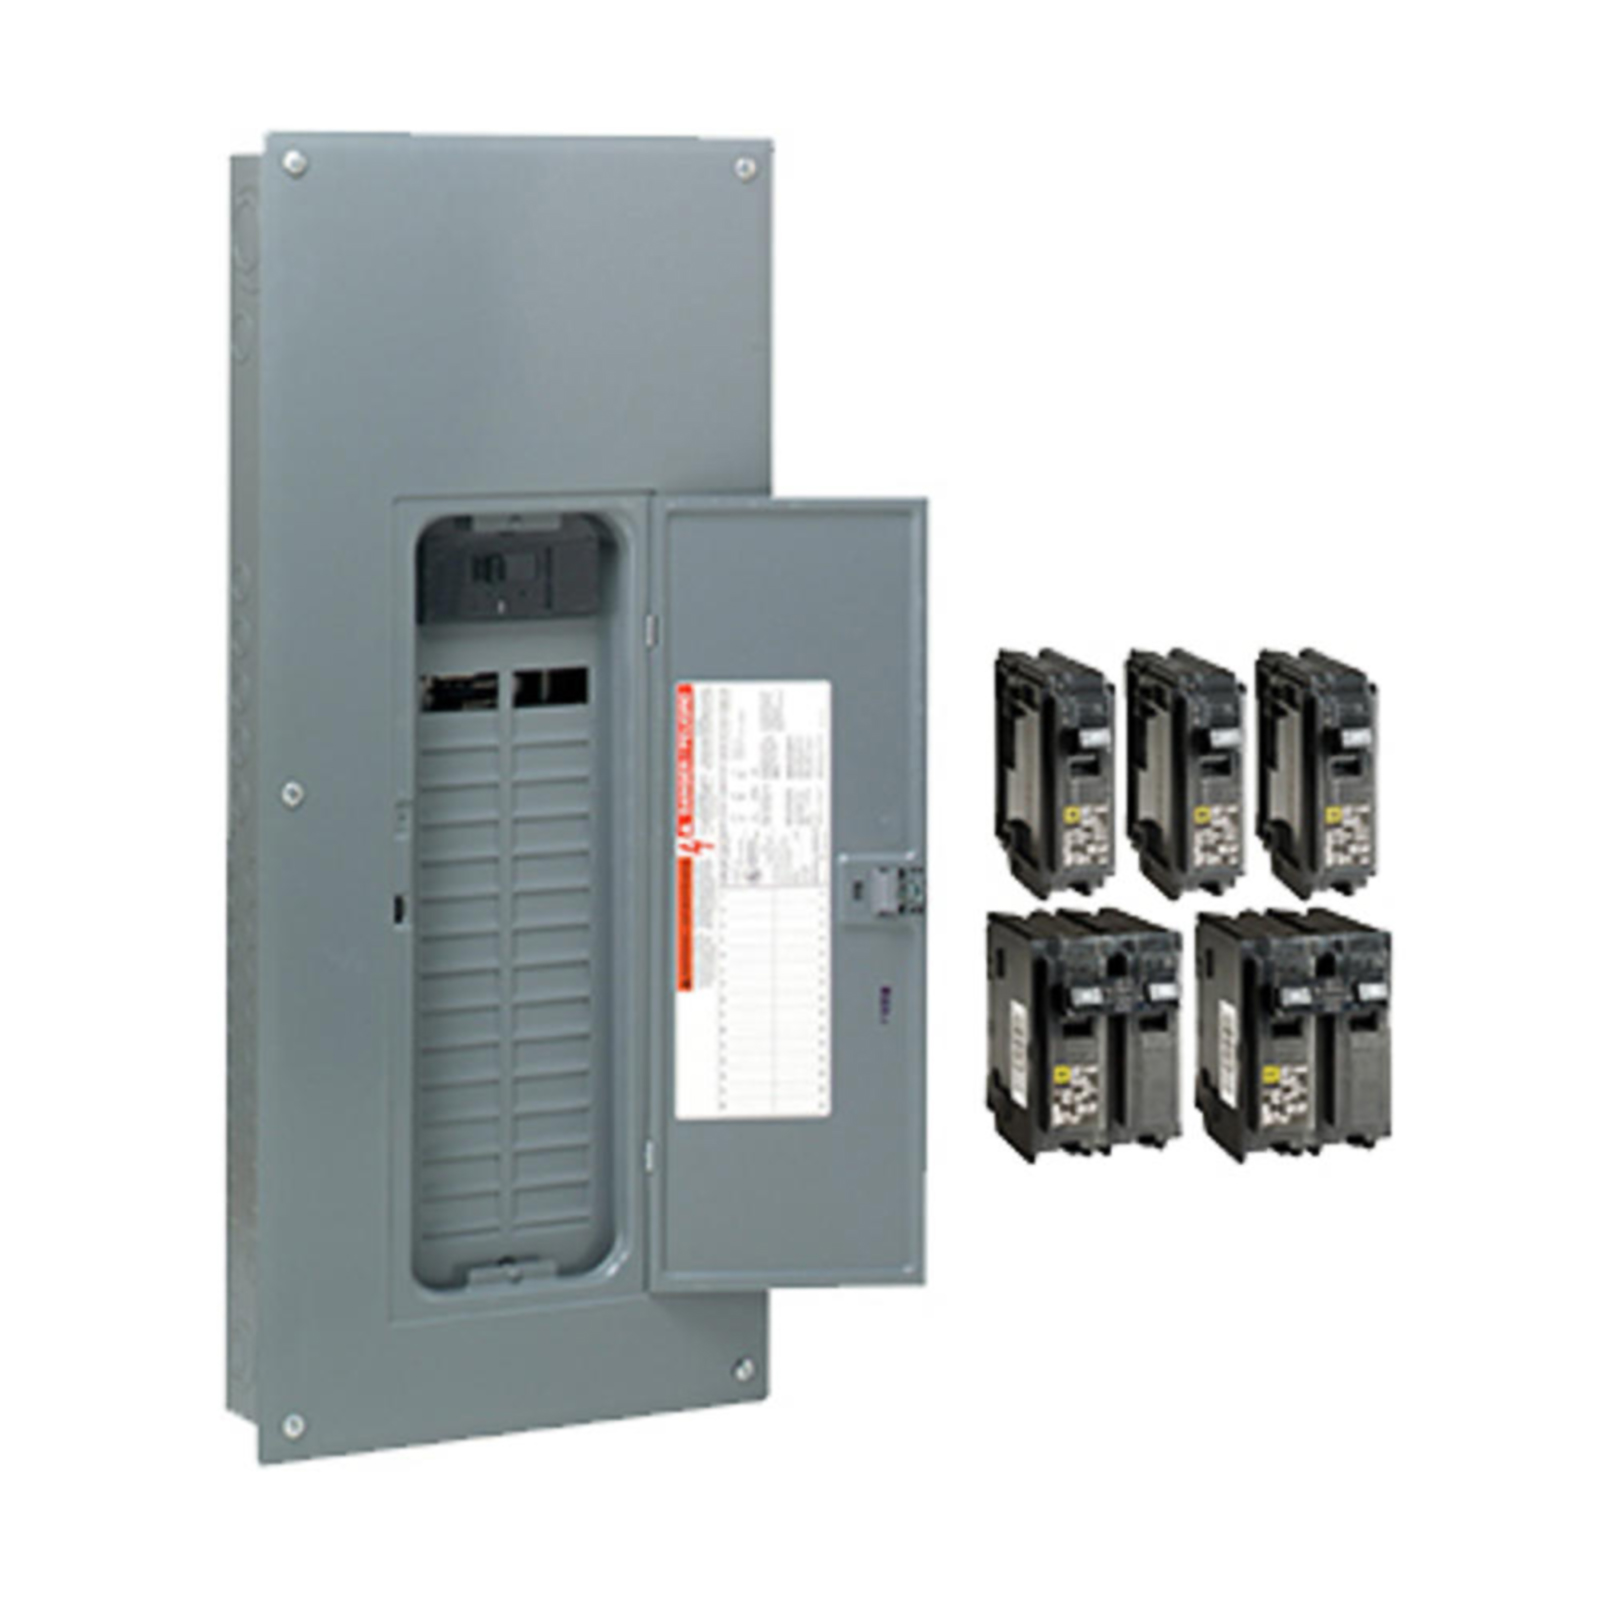 Square D by Schneider Electric 200A Square D Homeline Main Breaker Load Center